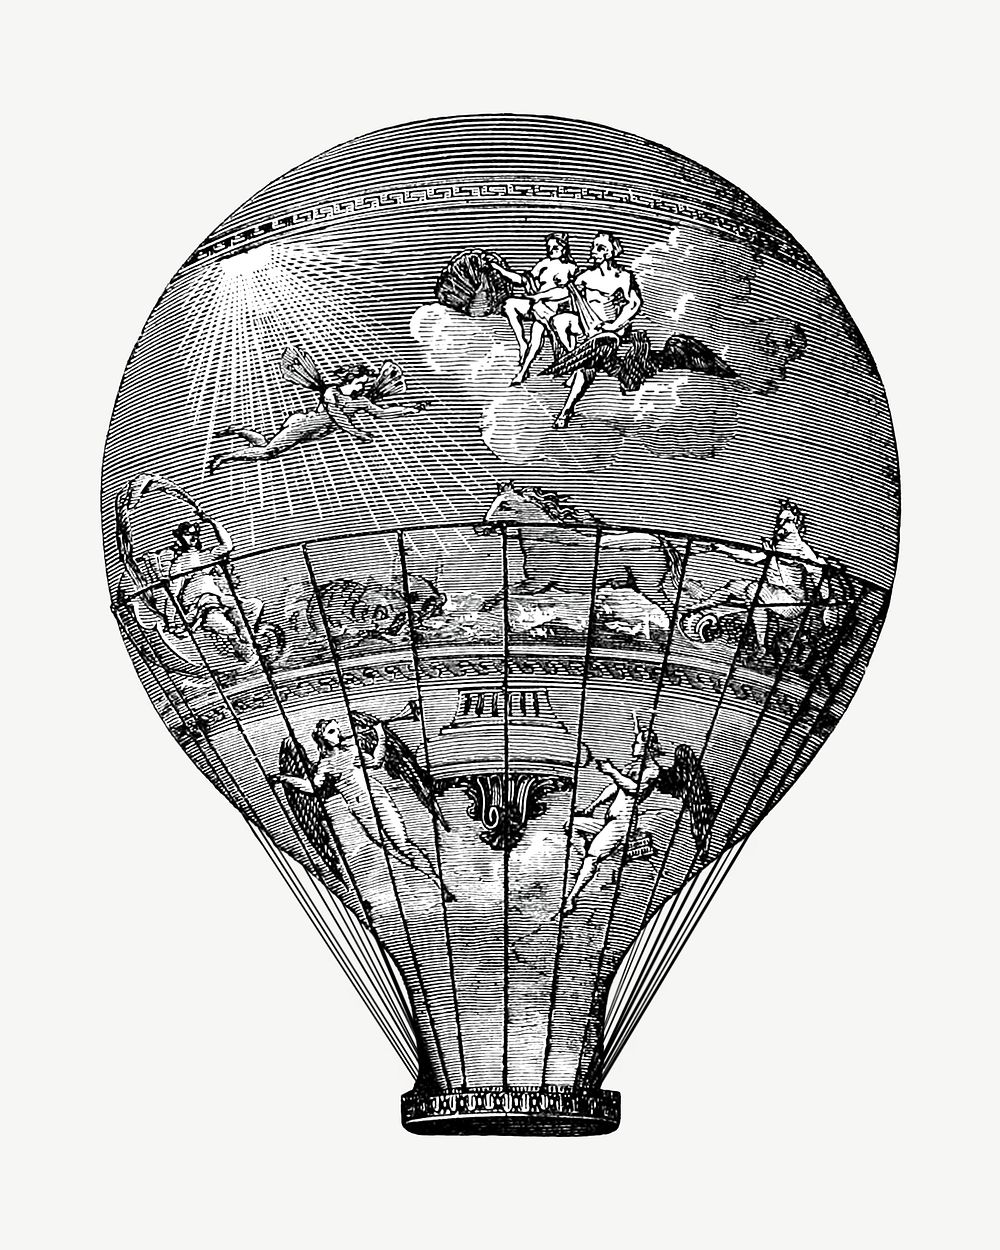 Vintage hot air balloon illustration psd. Remixed by rawpixel.